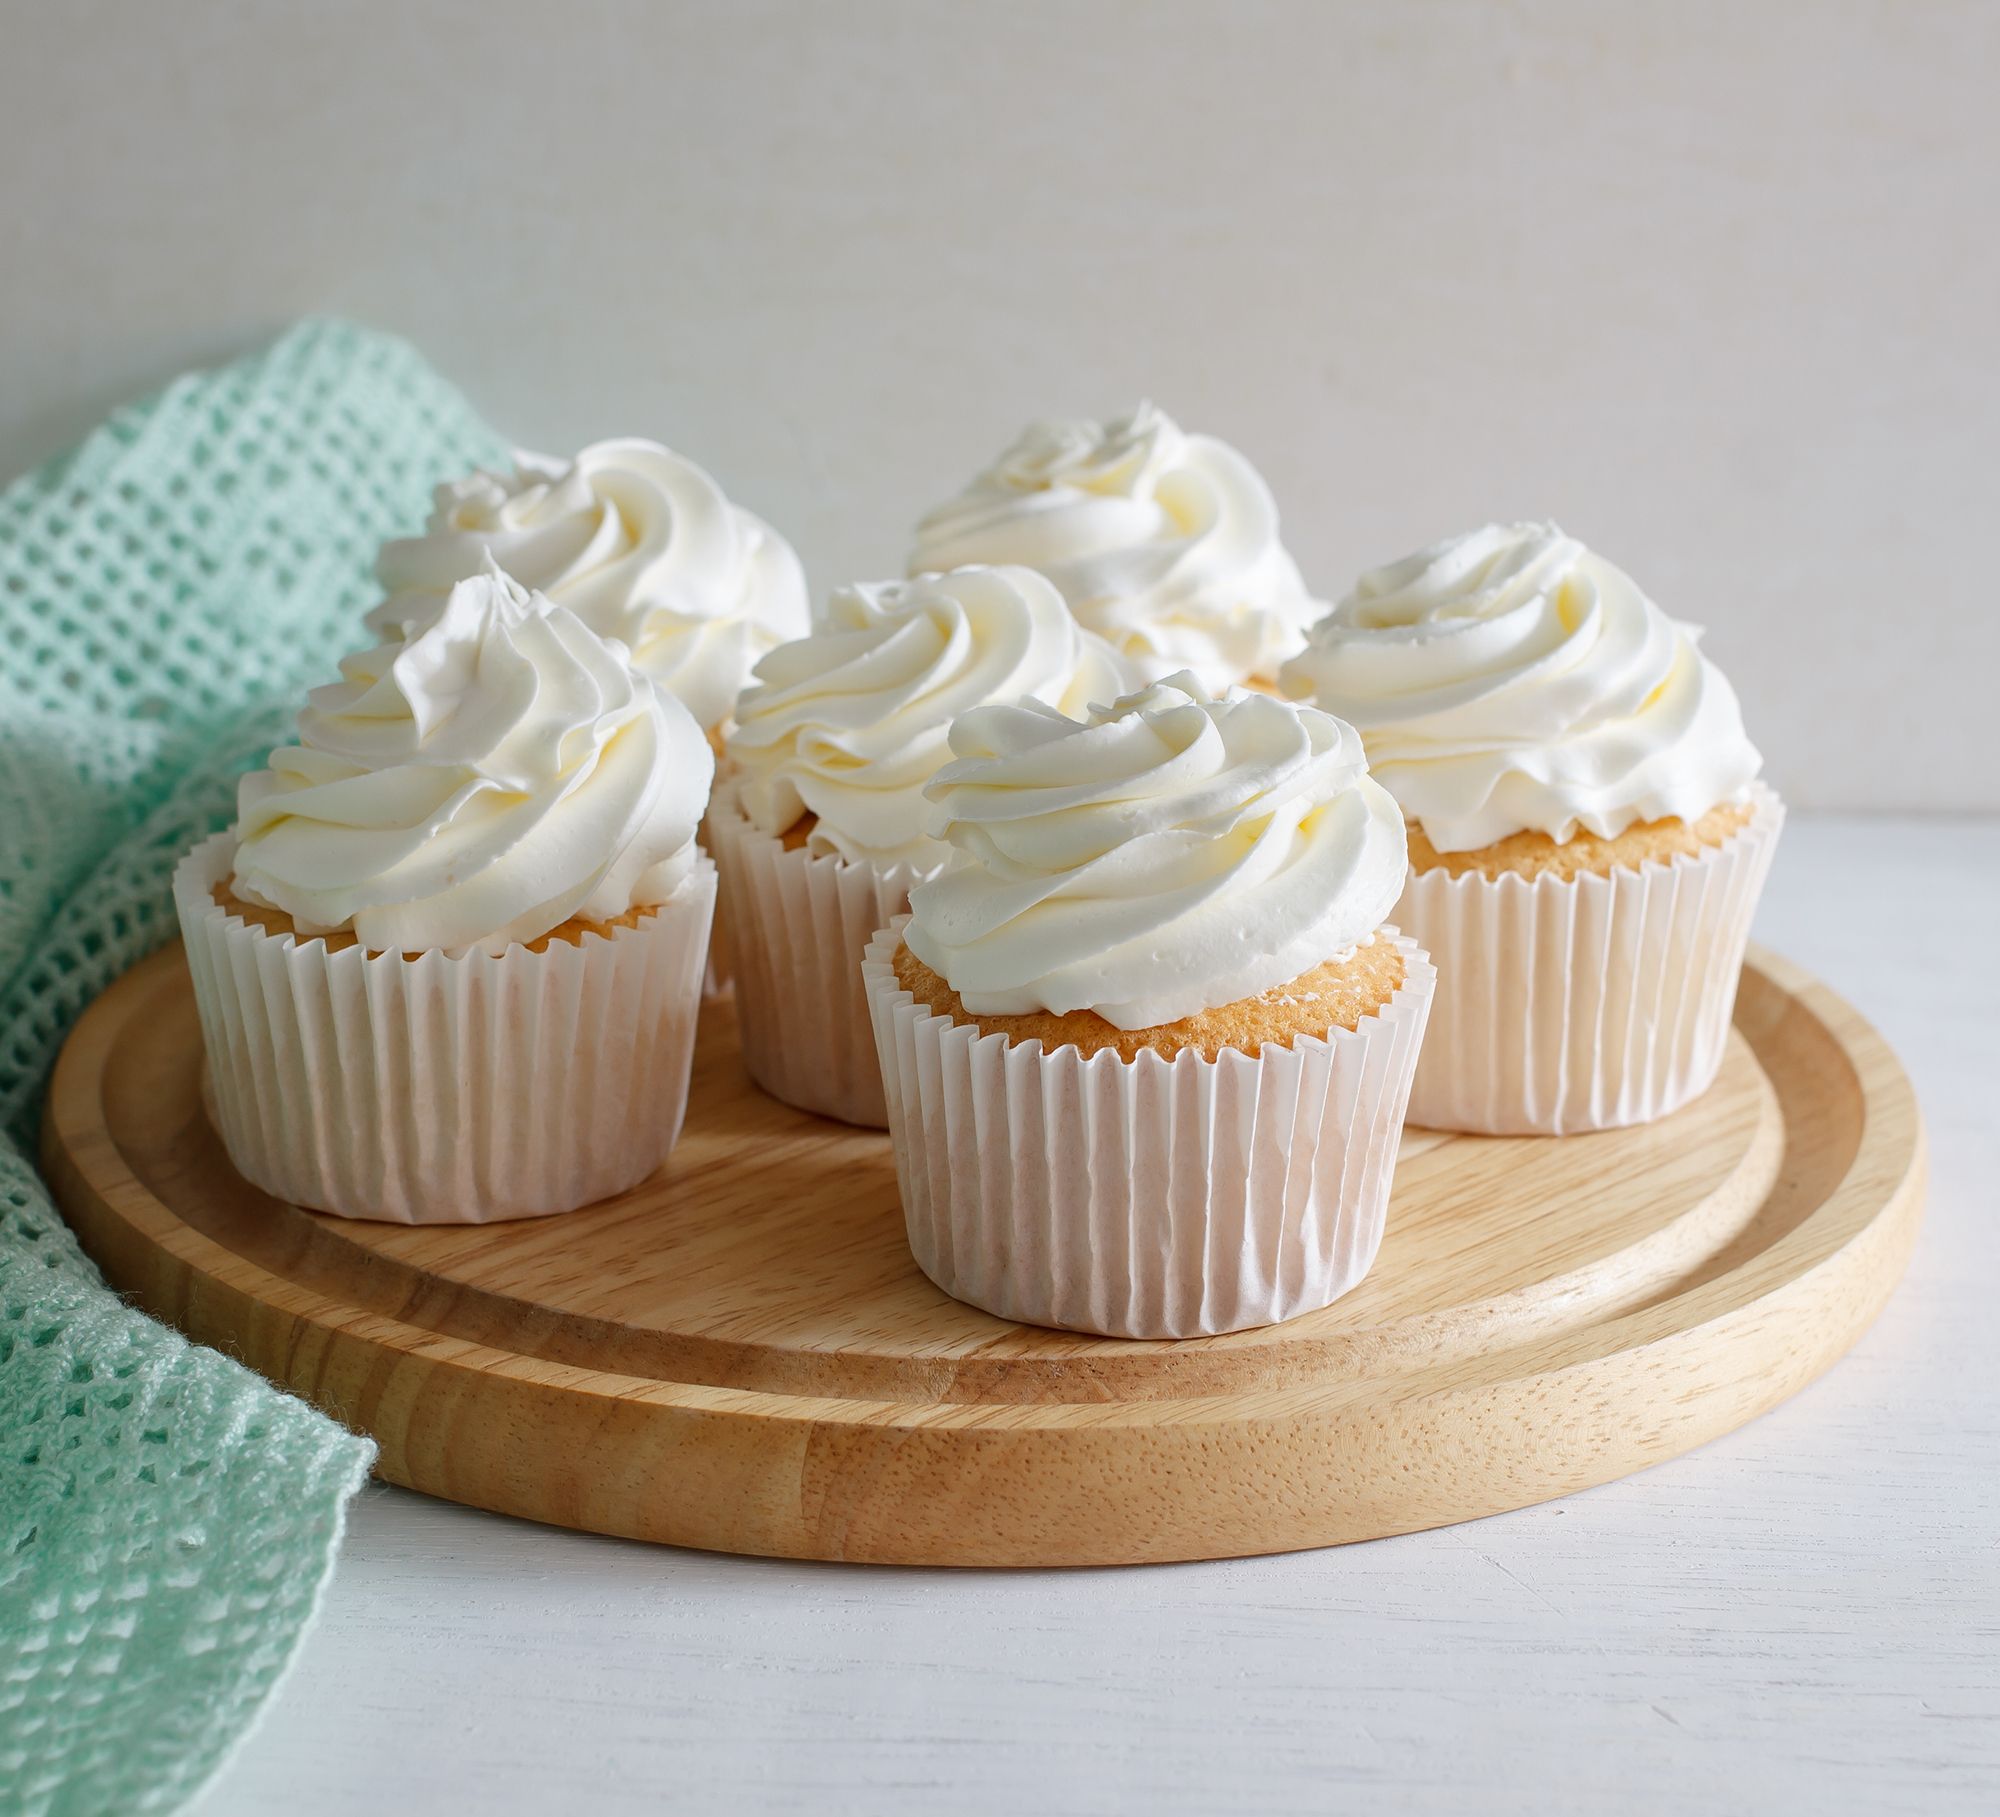 Pumpkin Cupcakes (+ Cream Cheese Frosting) - Live Well Bake Often